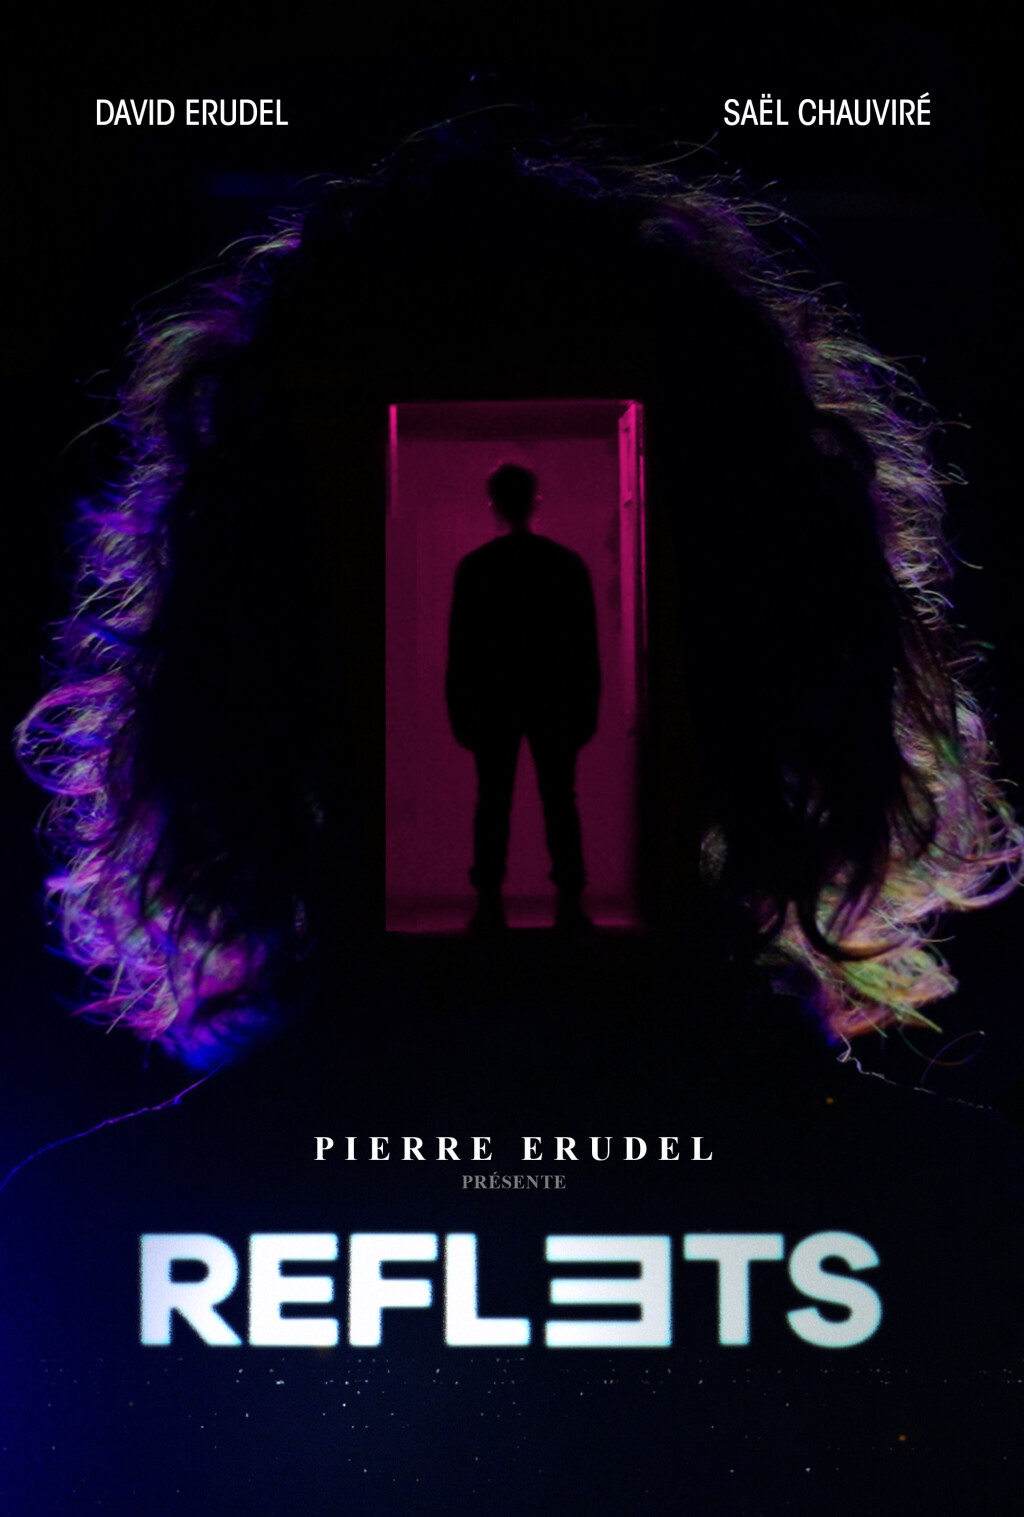 Filmposter for REFLECTS